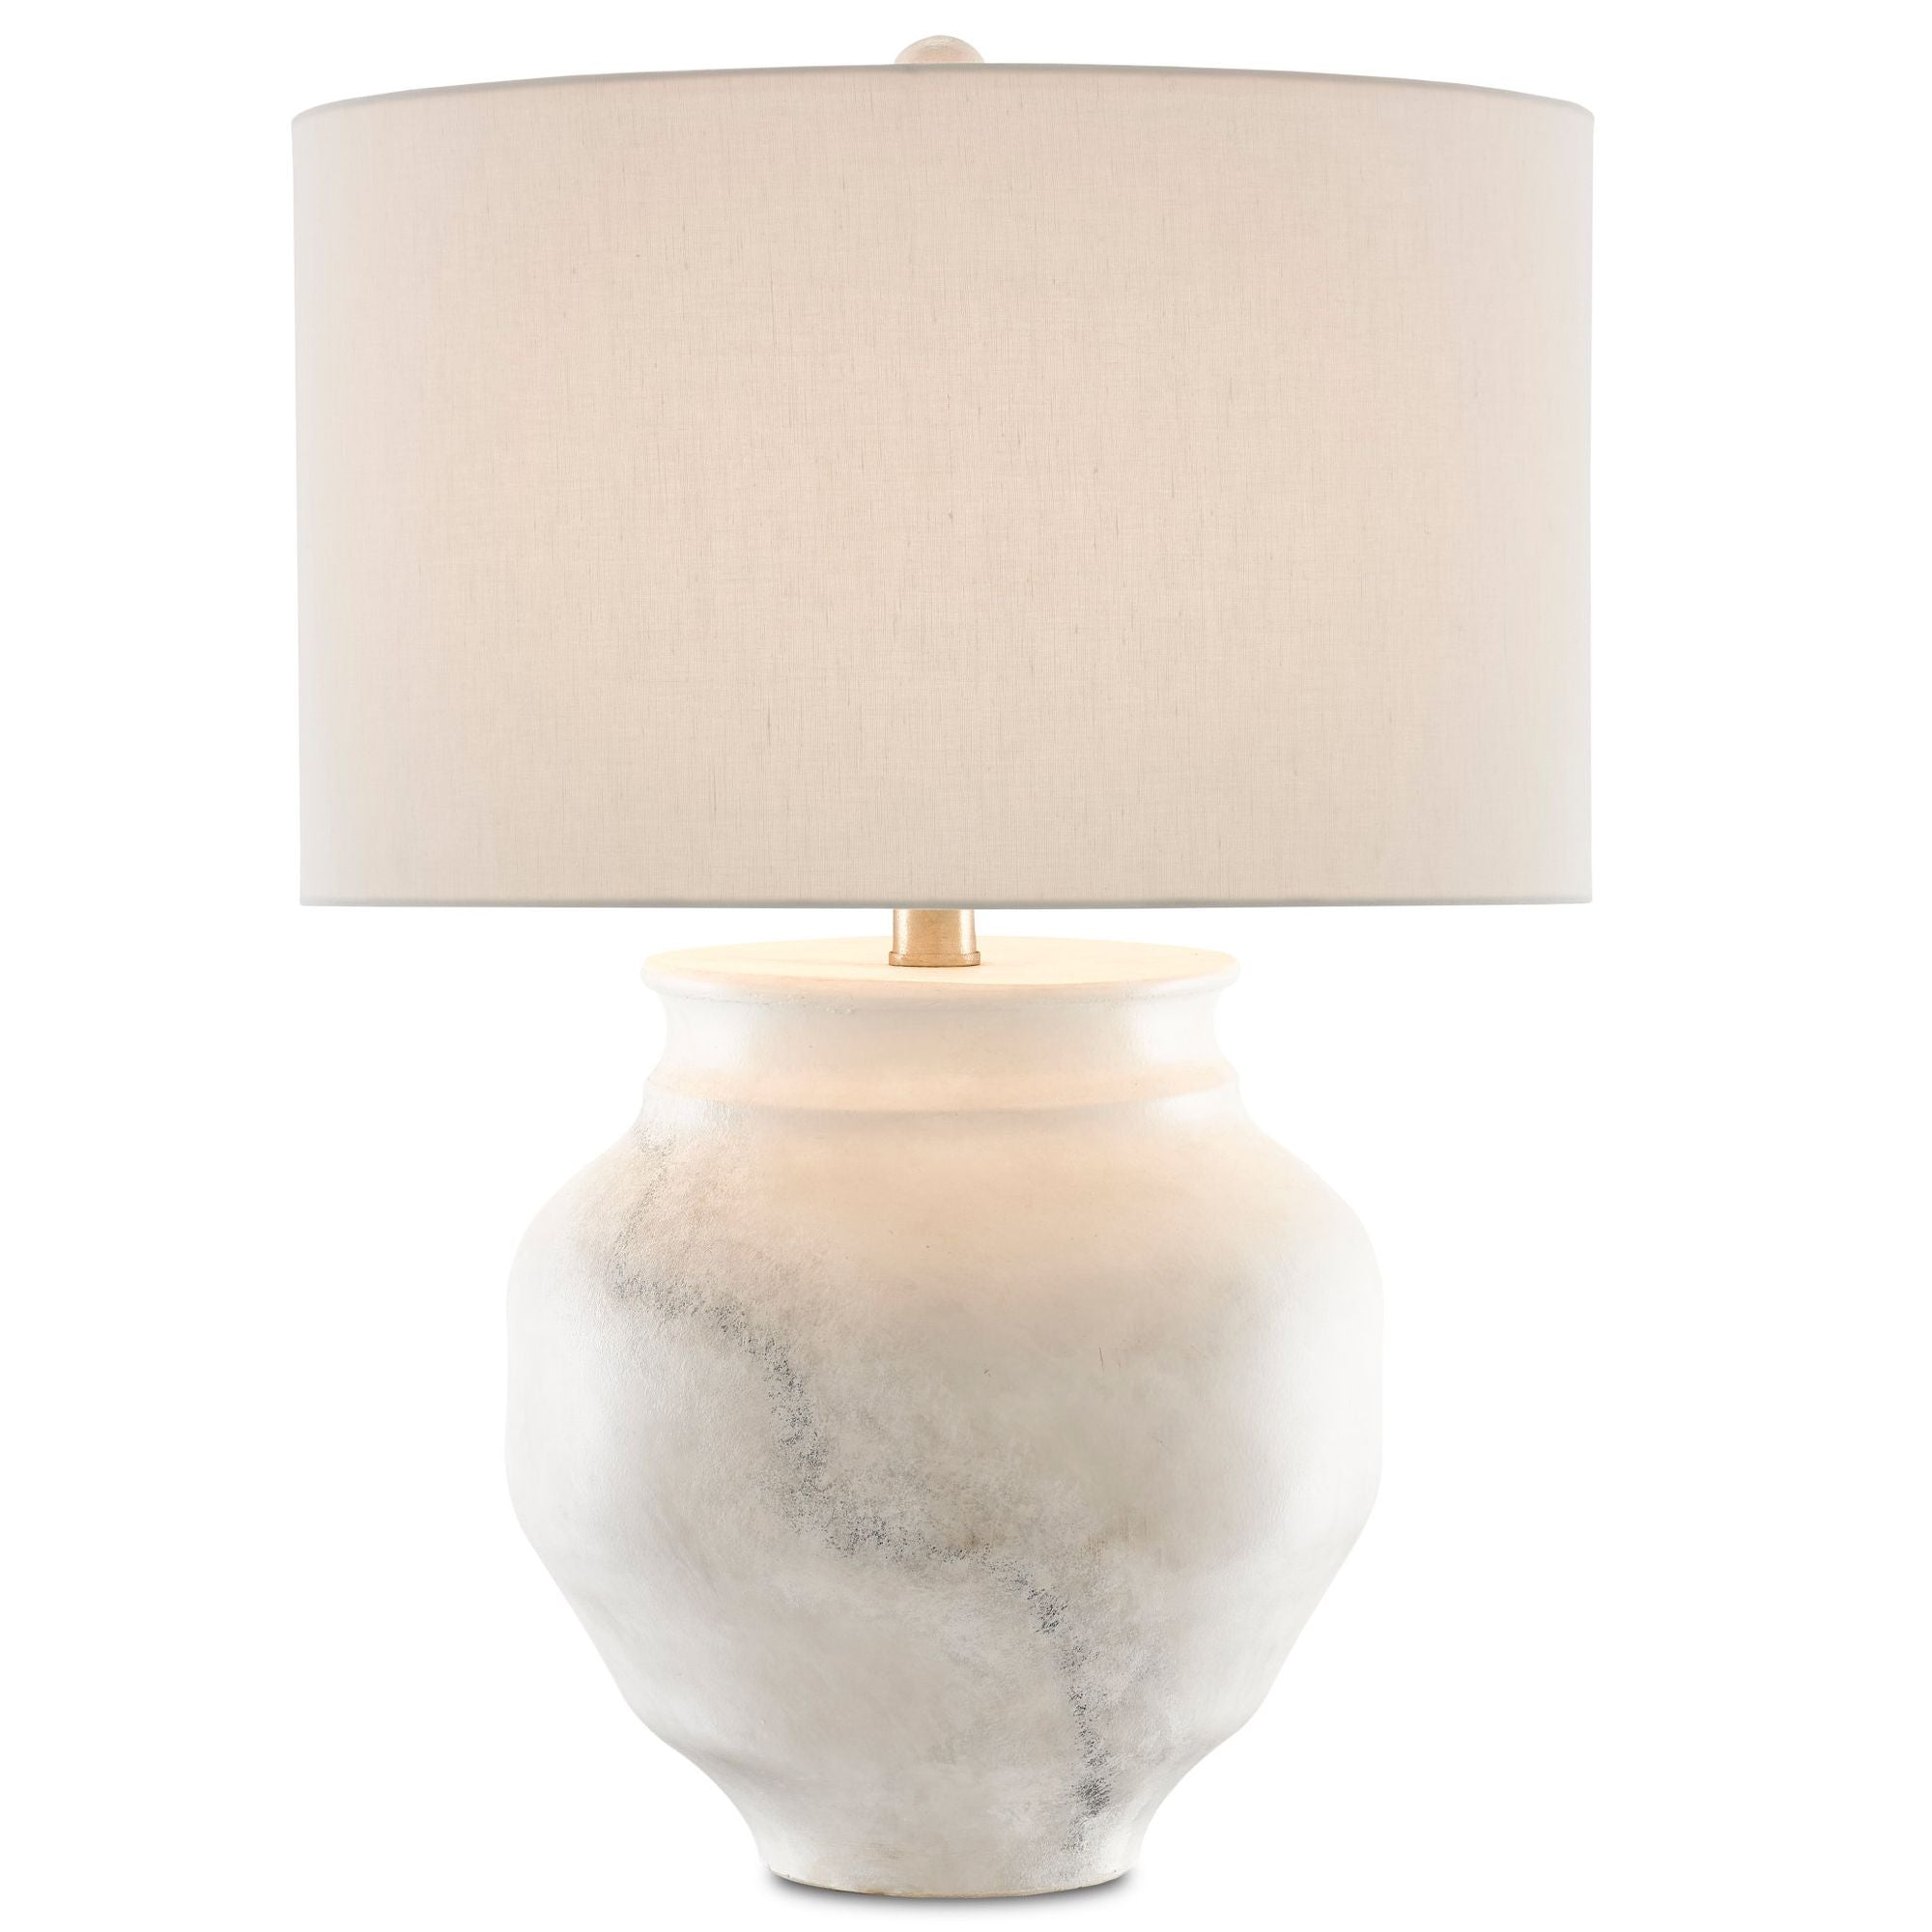 Kalossi White Table Lamp - Painted White/Painted Gray/Contemporary Silver Leaf